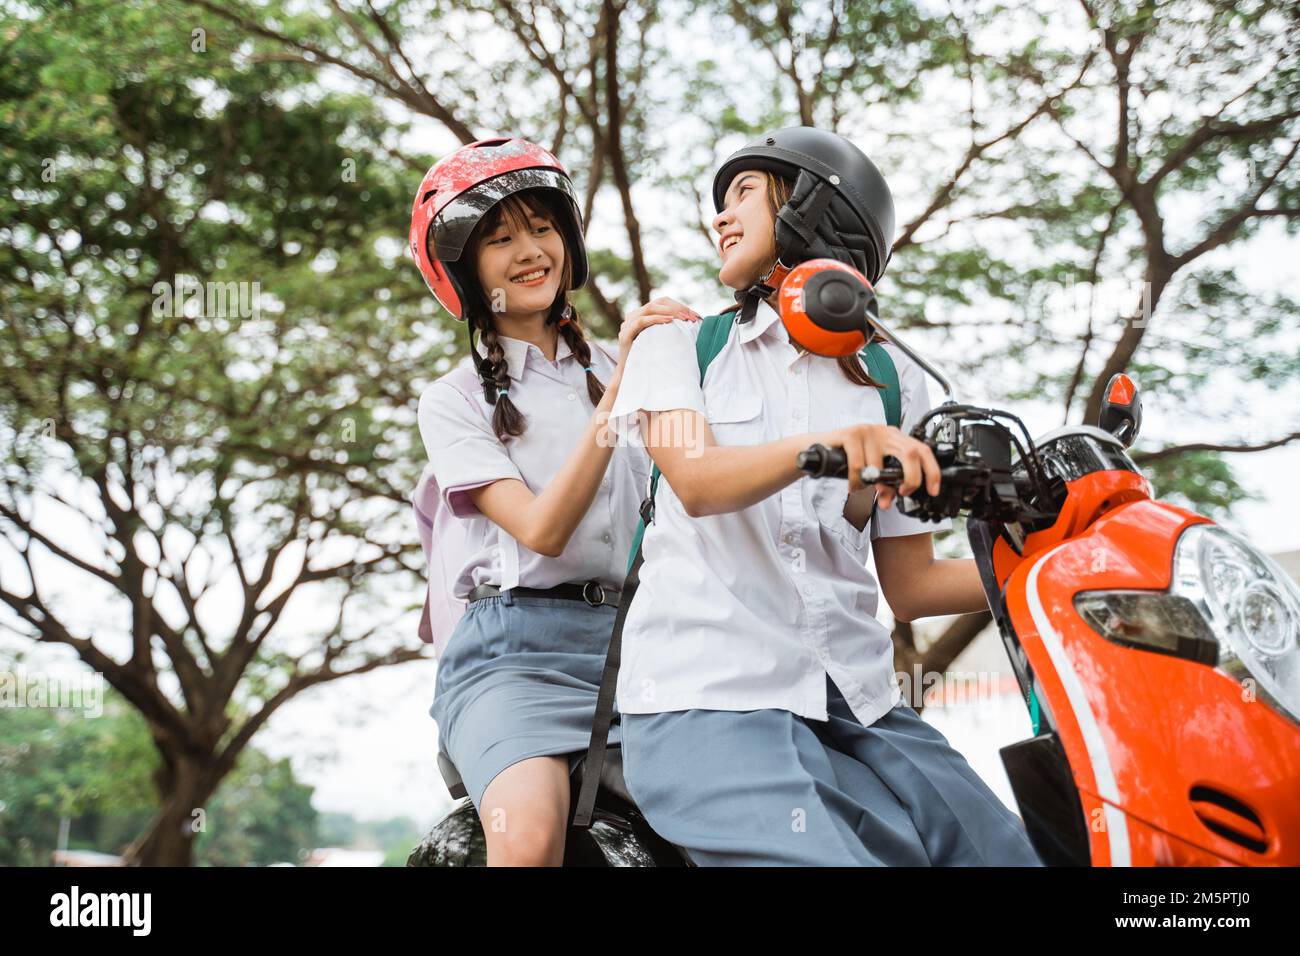 Two girls chatting while riding a motorcycle together Stock Photo